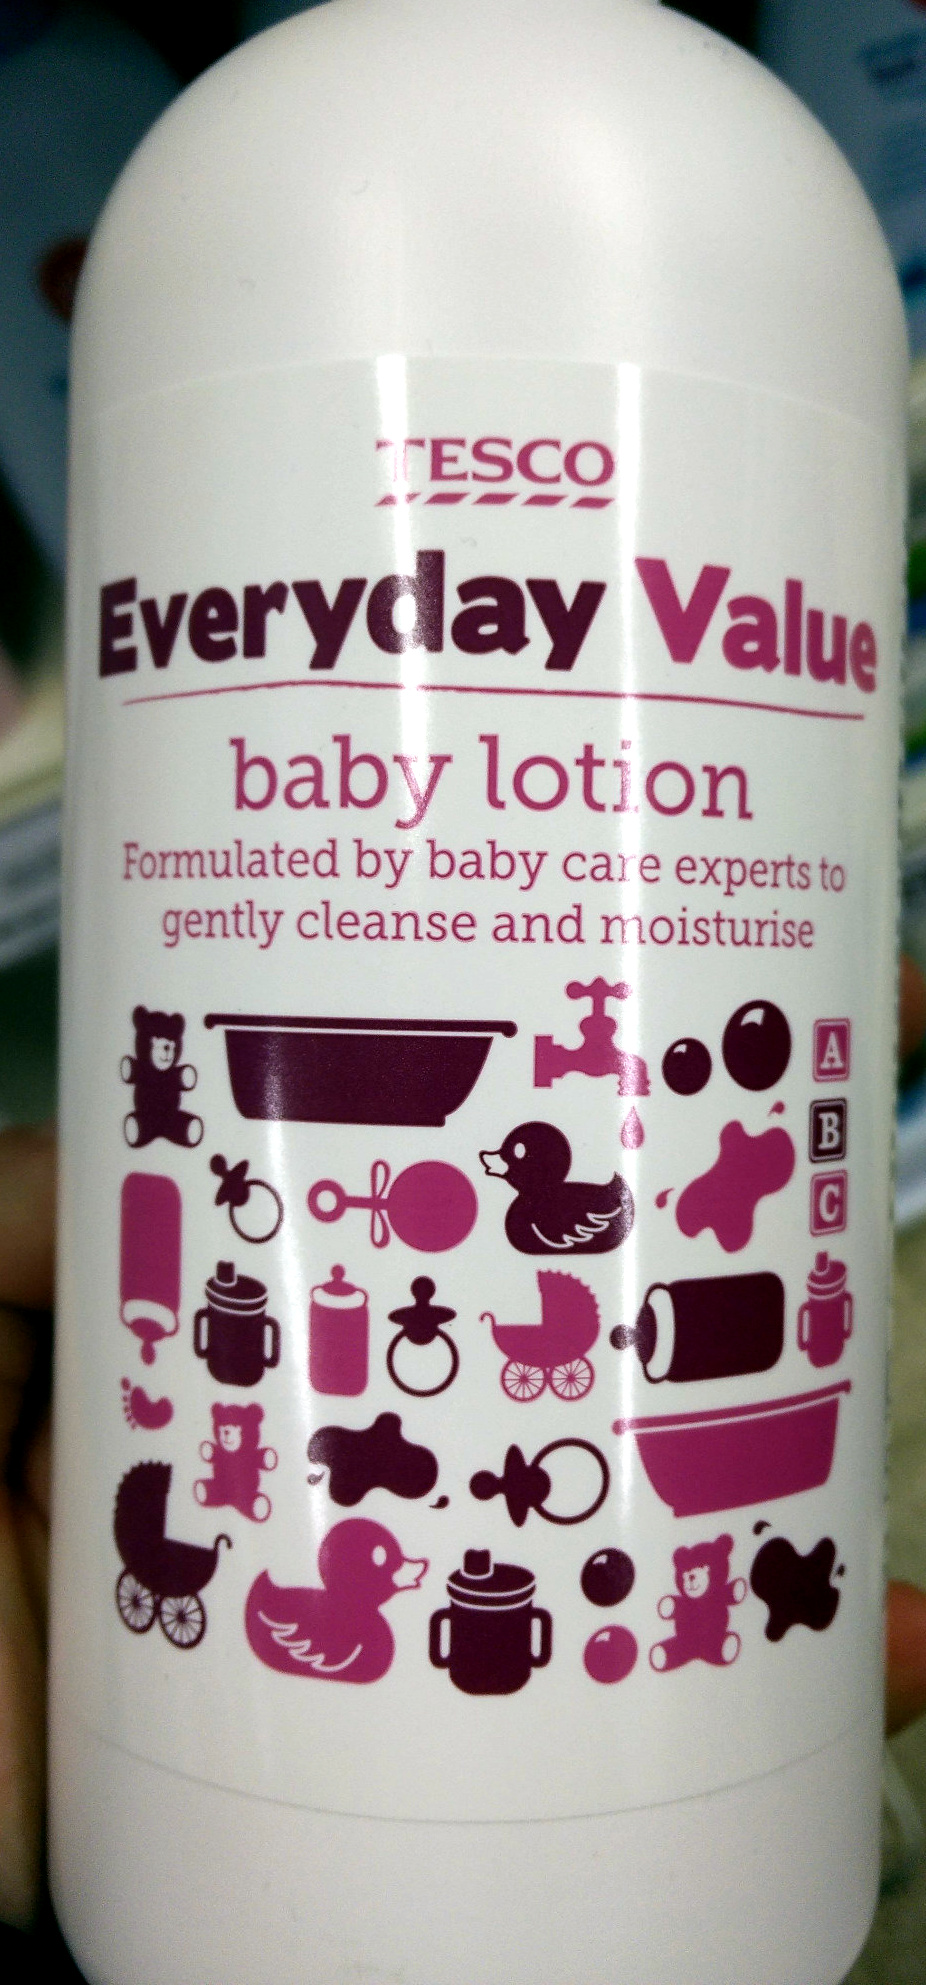 Everyday Value baby lotion - Product - en